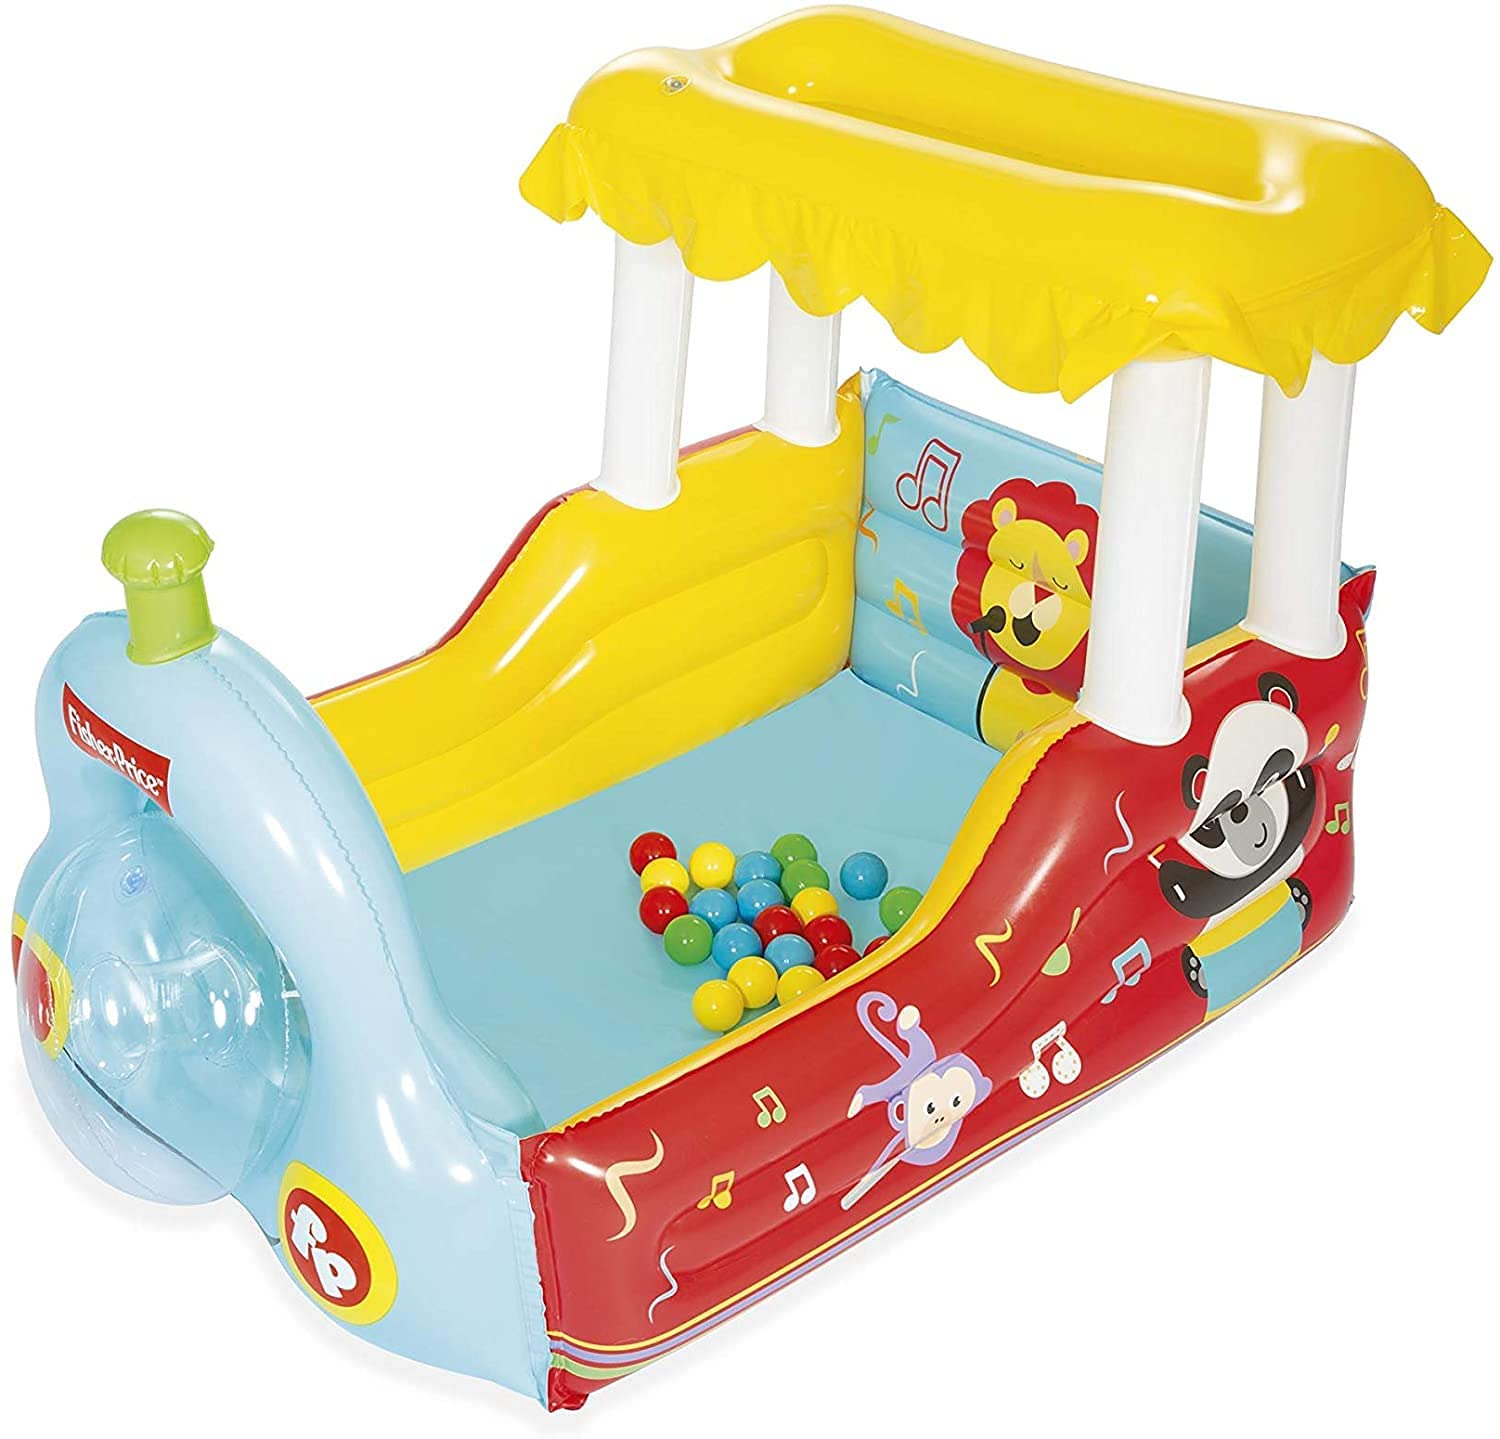 Bestway Fisher-Price Inflatable Ball Pit for Kids $19 + Free Shipping w/ Prime or $25+